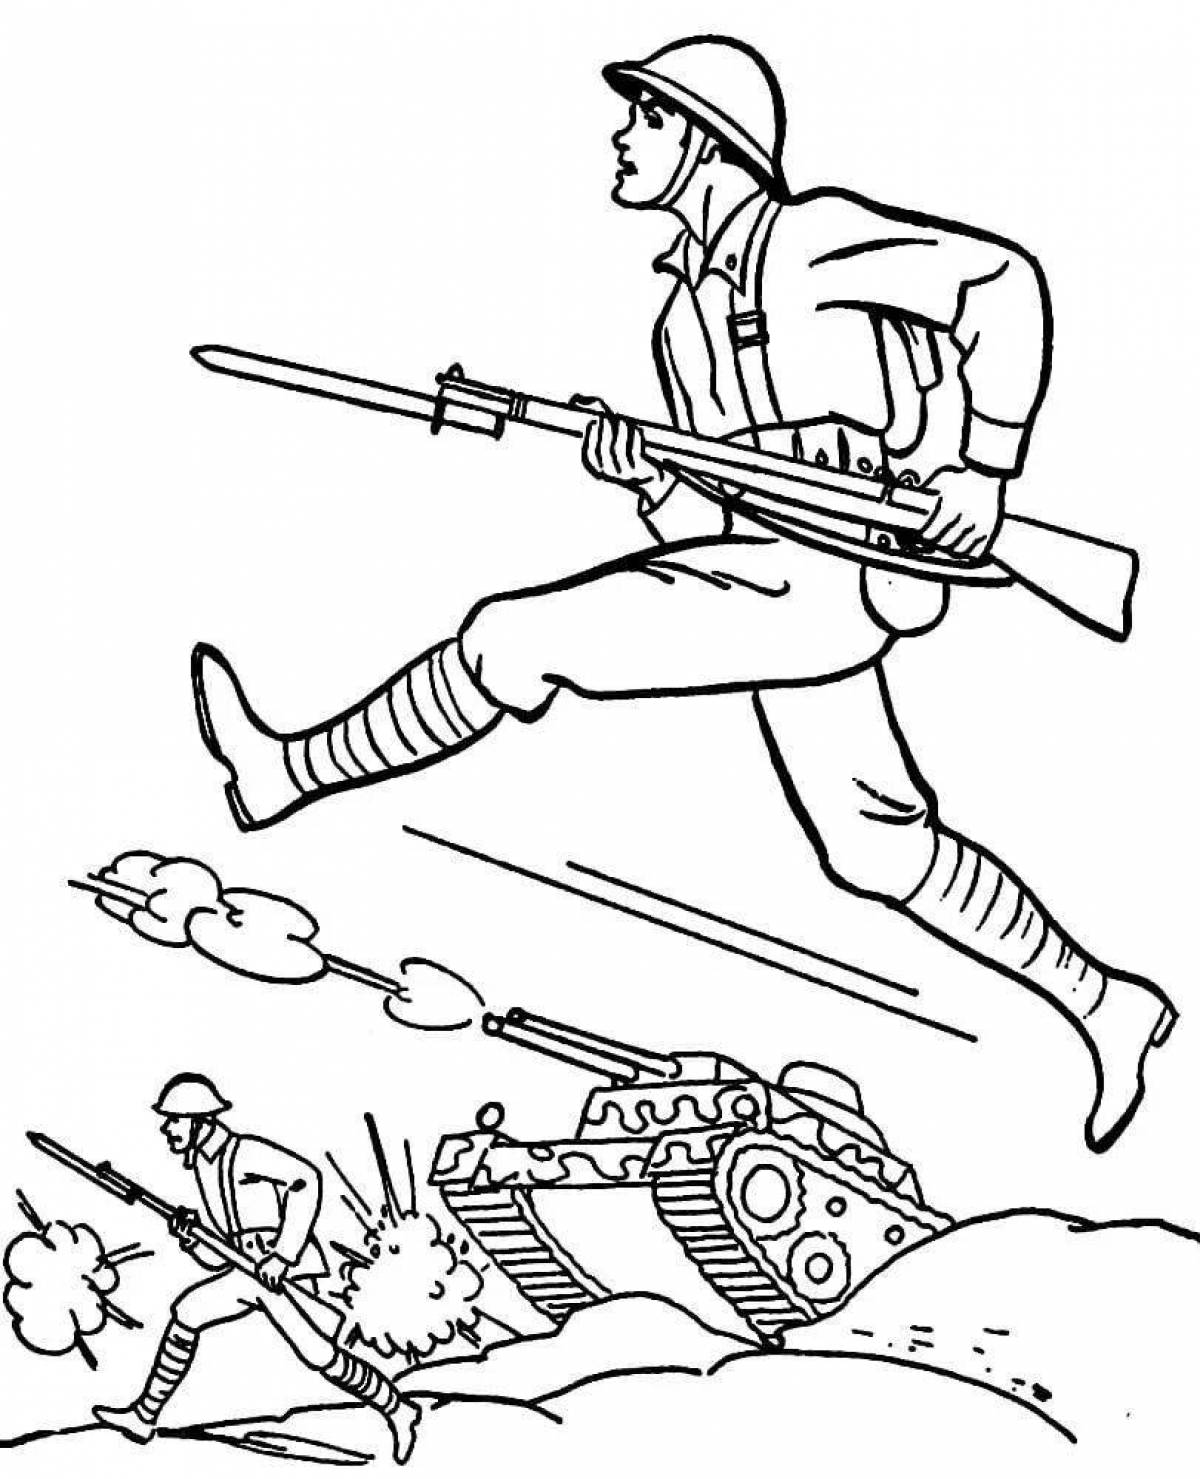 Coloring page rich soldier of the ussr